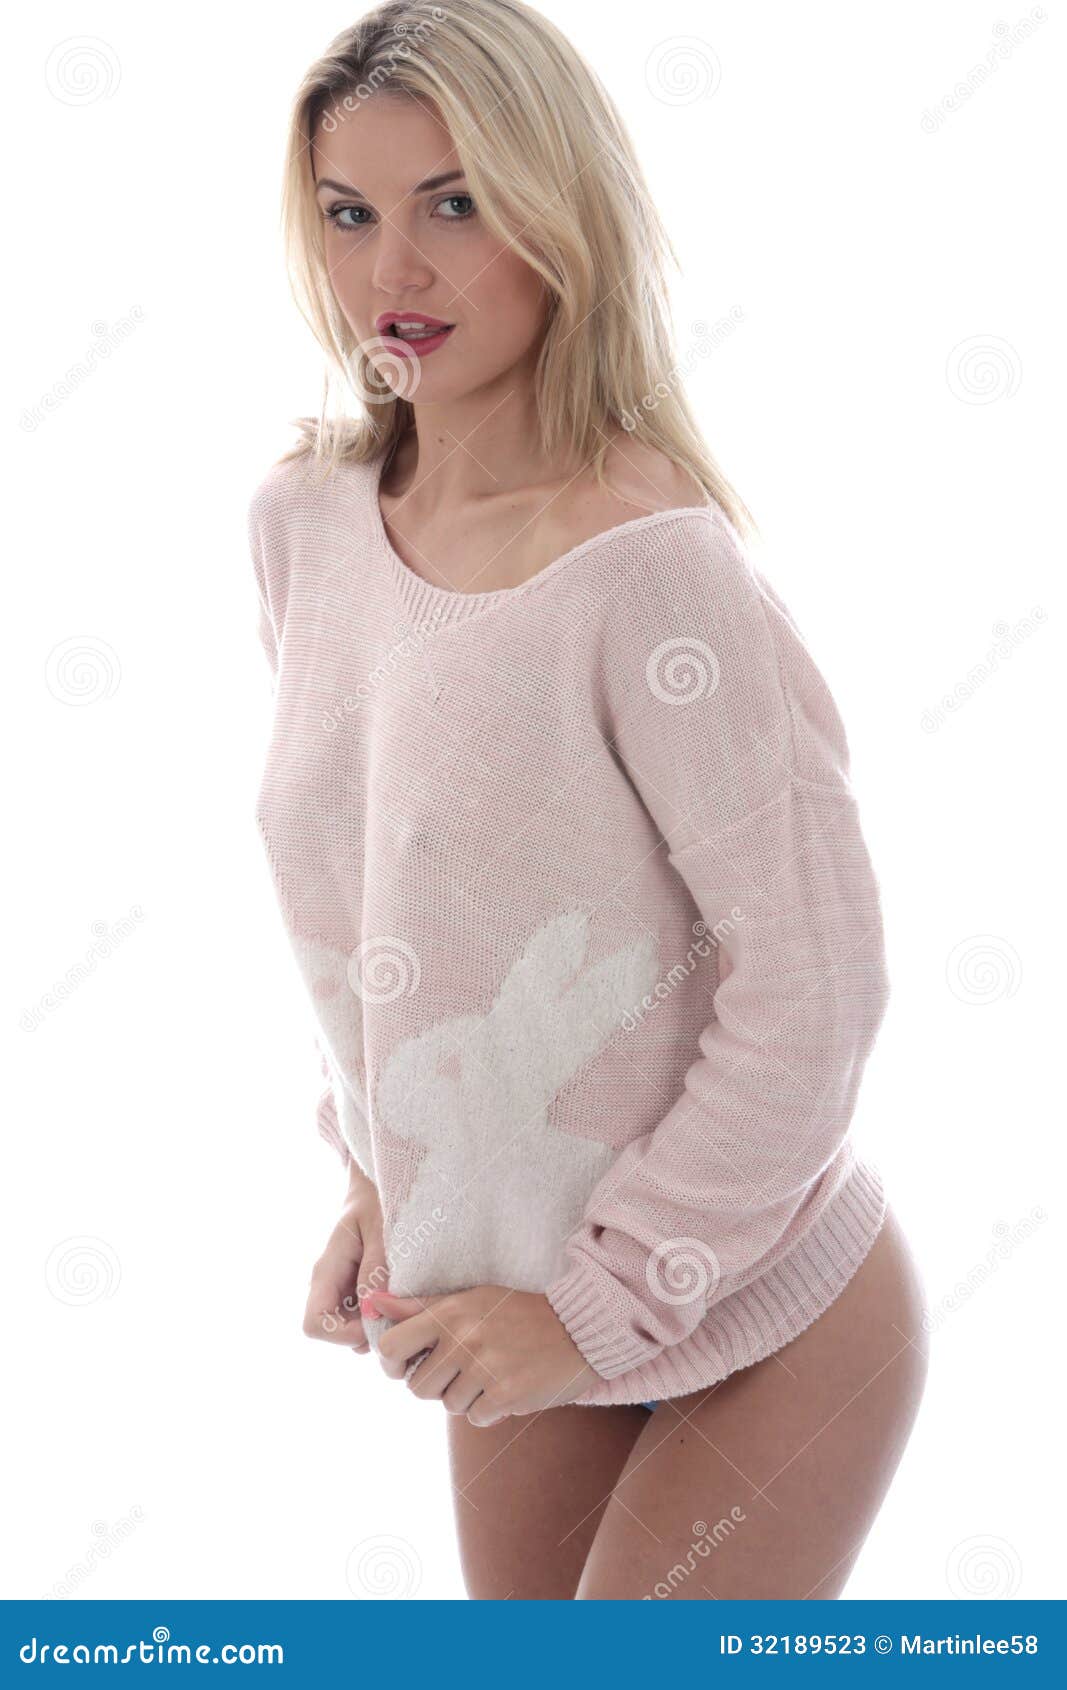 Model Released. Sexy Young Woman Wearing Panties Stock Photo